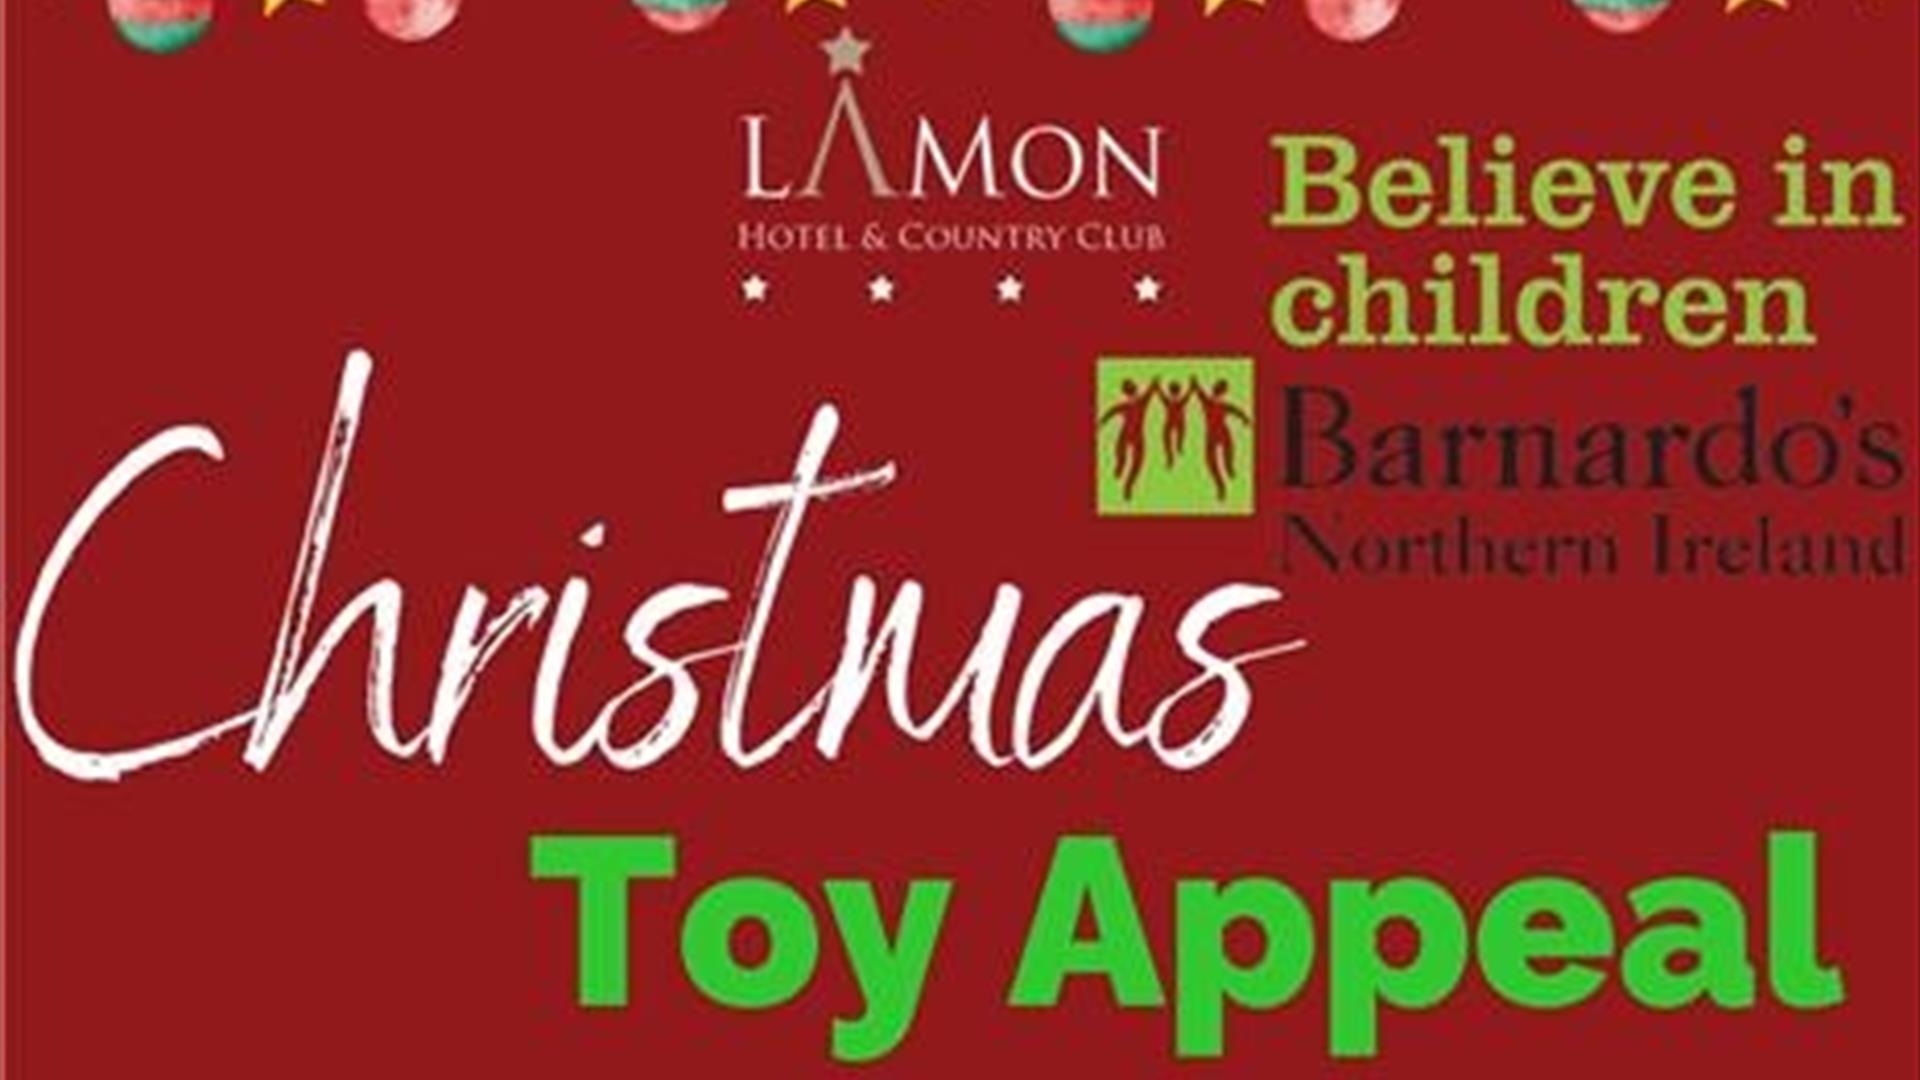 Image shows deep red poster with white and green text advertising the Christmas Toy Appeal at La Mon Hotel